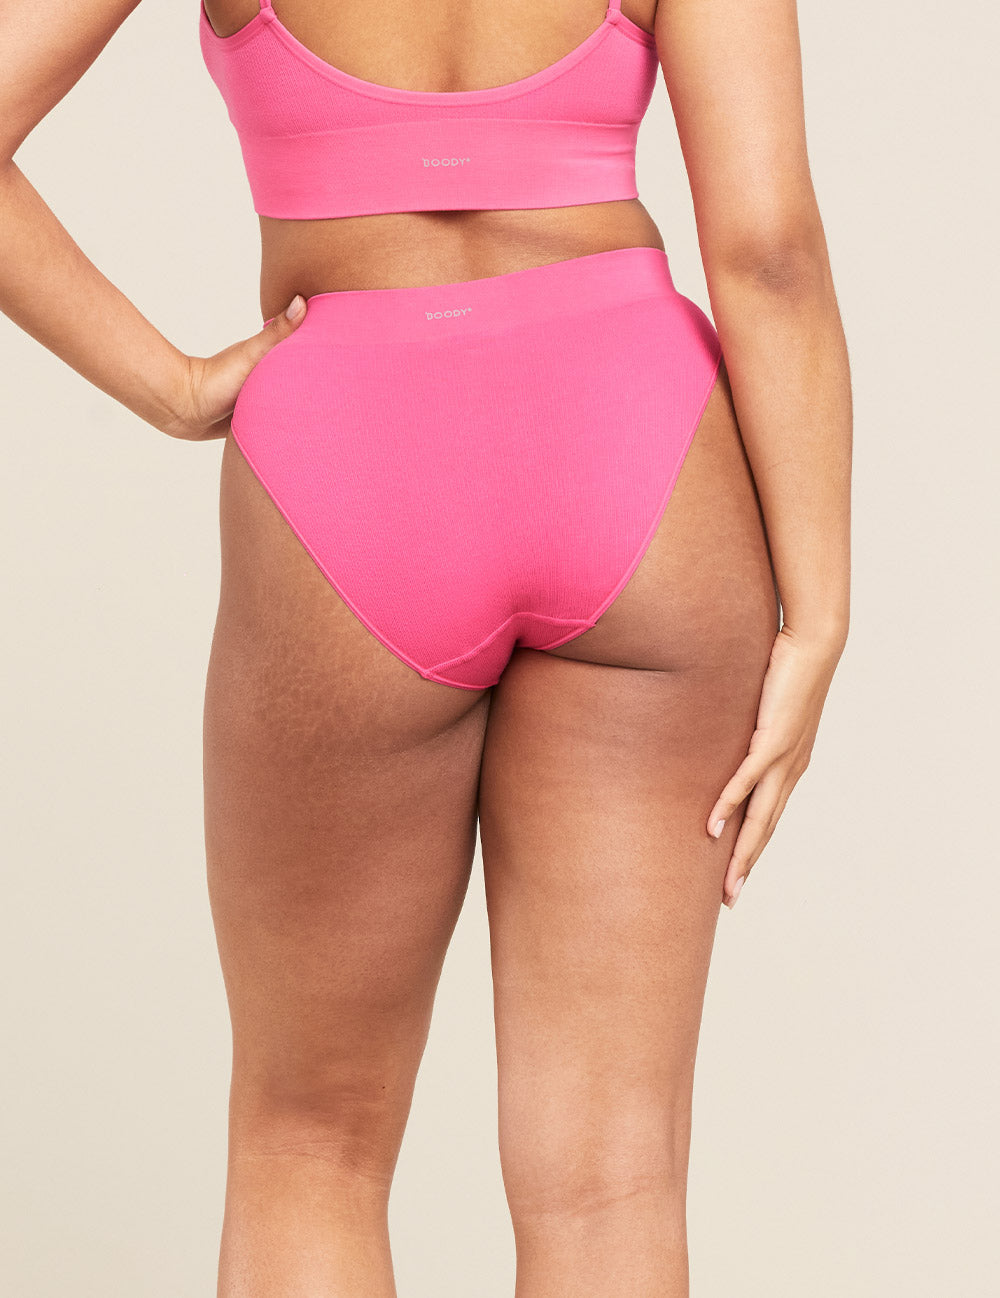 Boody Women's Lyocell Ribbed High Leg Brief in Breast Cancer Awareness Pink Back